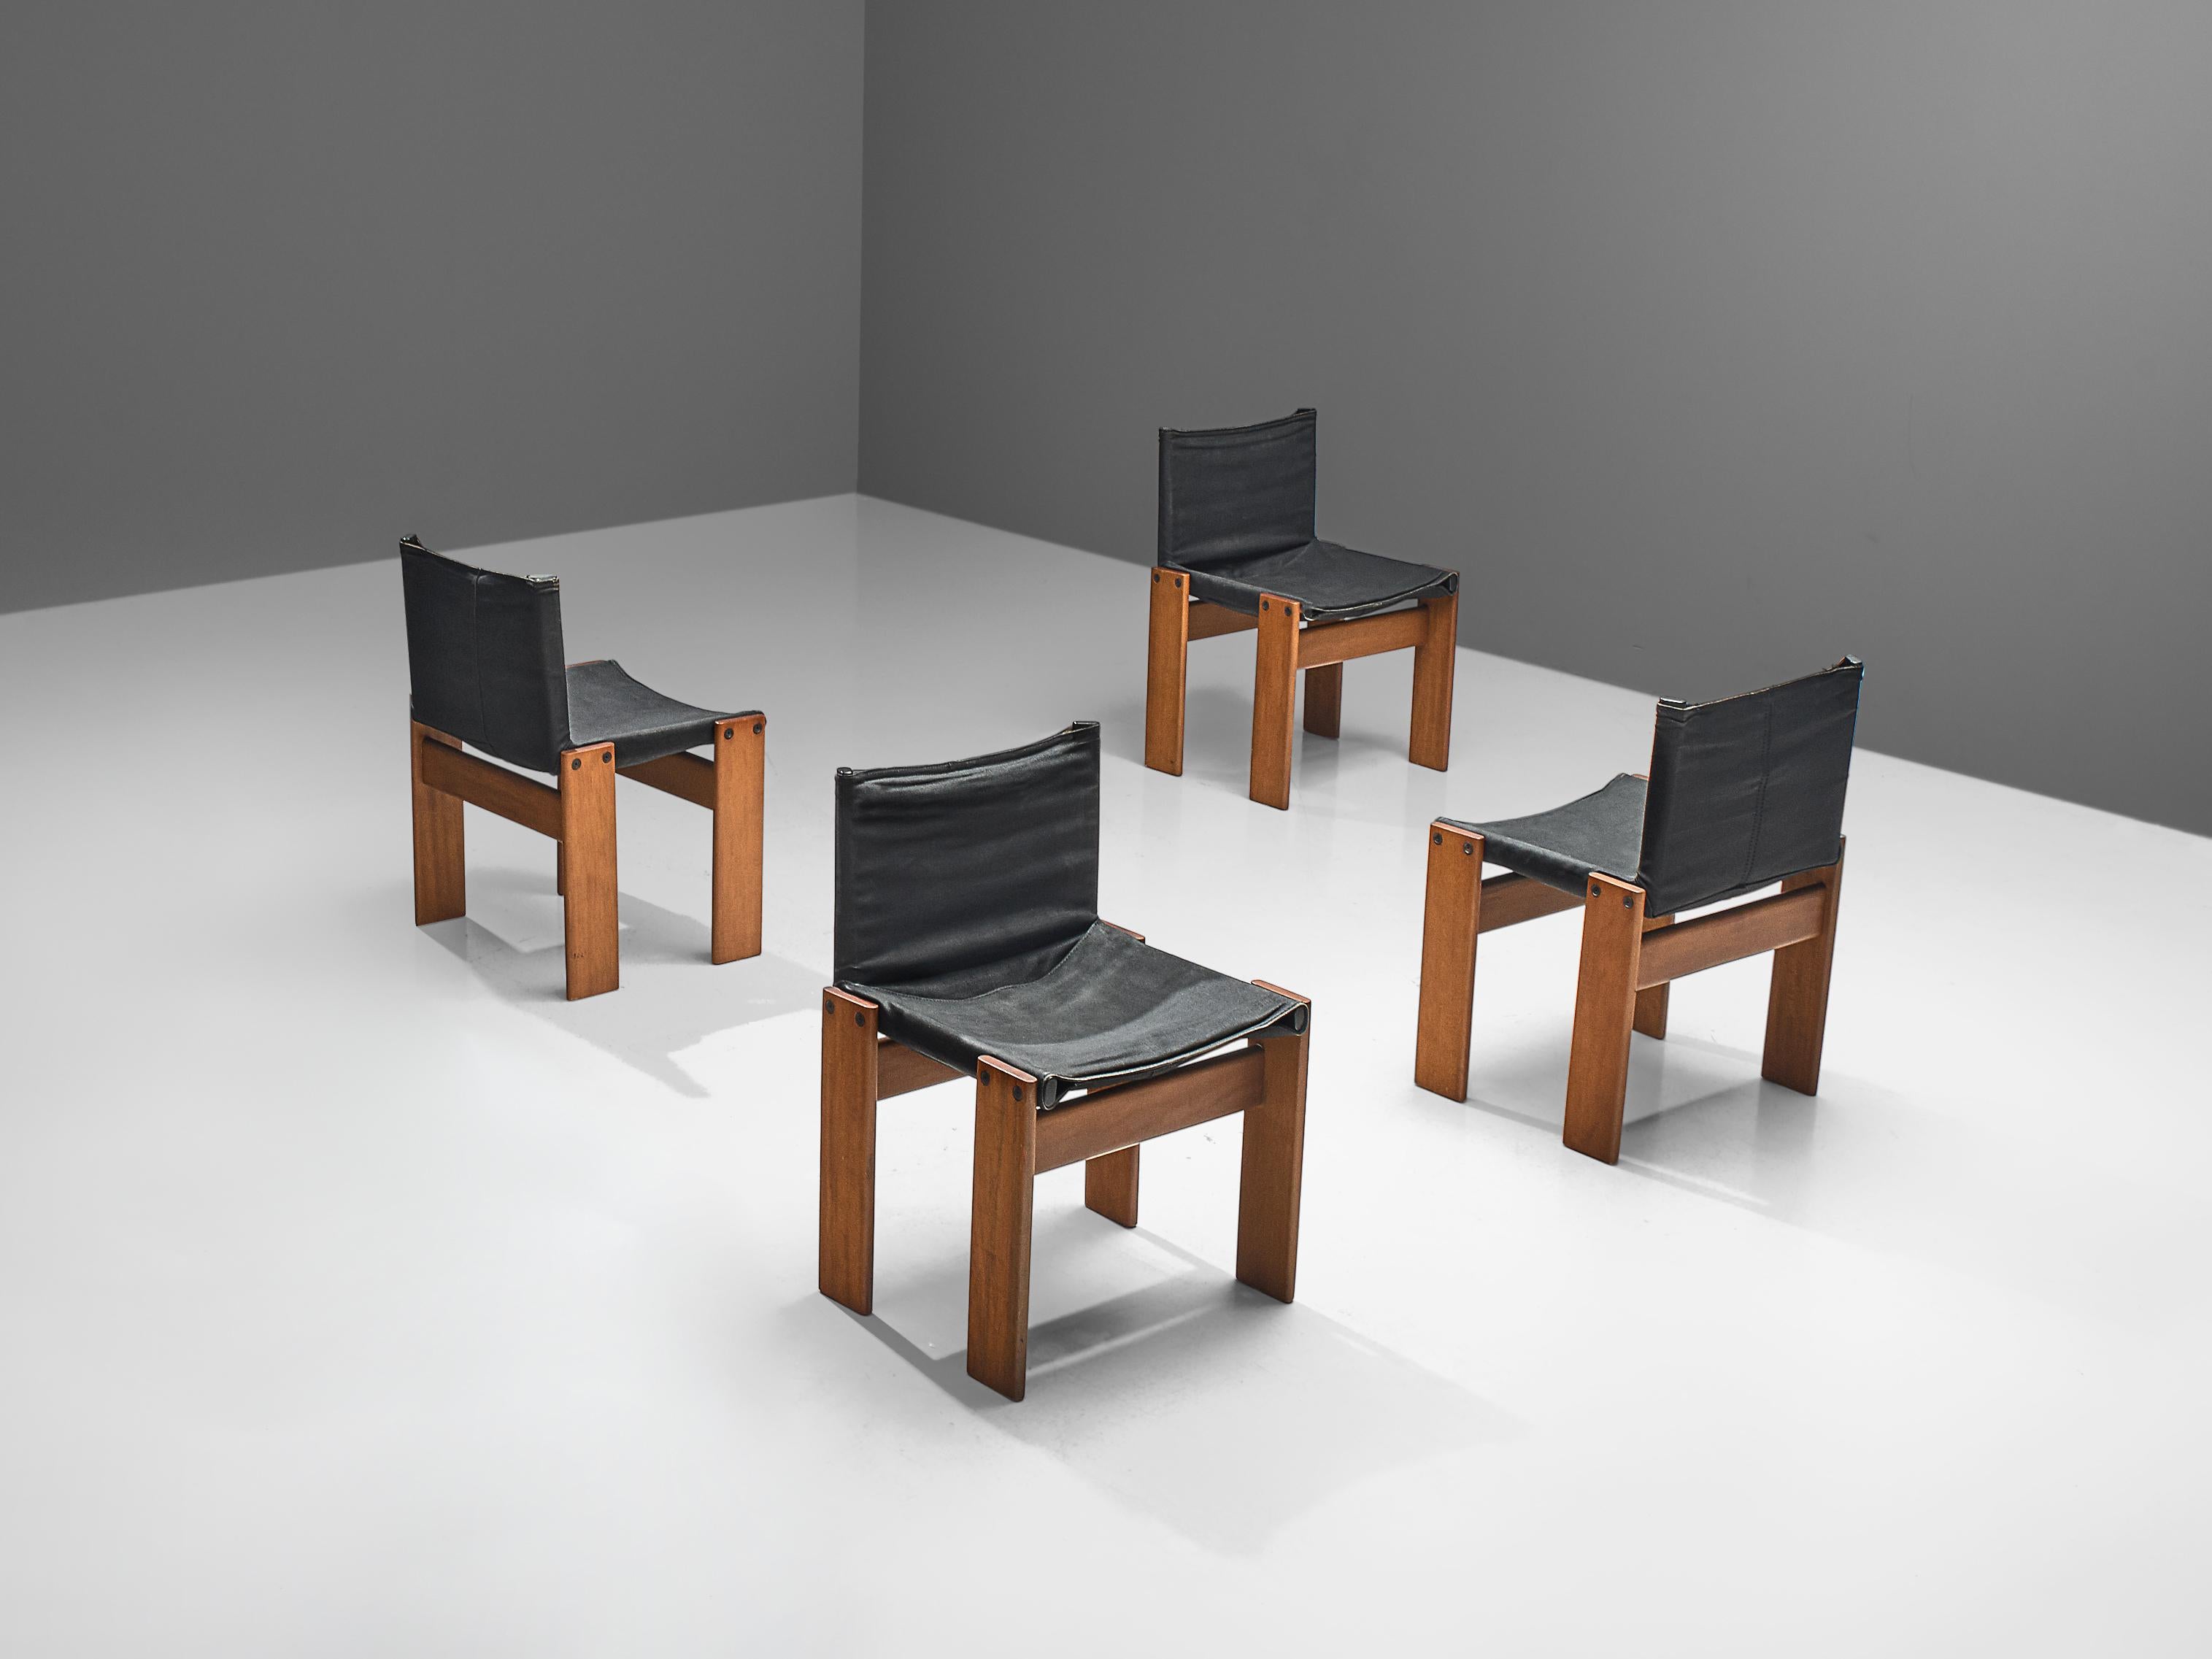 Afra & Tobia Scarpa for Molteni, set of four 'Monk' chairs, walnut and black canvas, Italy, 1974.

The black canvas forms a striking combination with the warm walnut wood. Interesting is the 'flat' shape of this chair where the designer has chosen